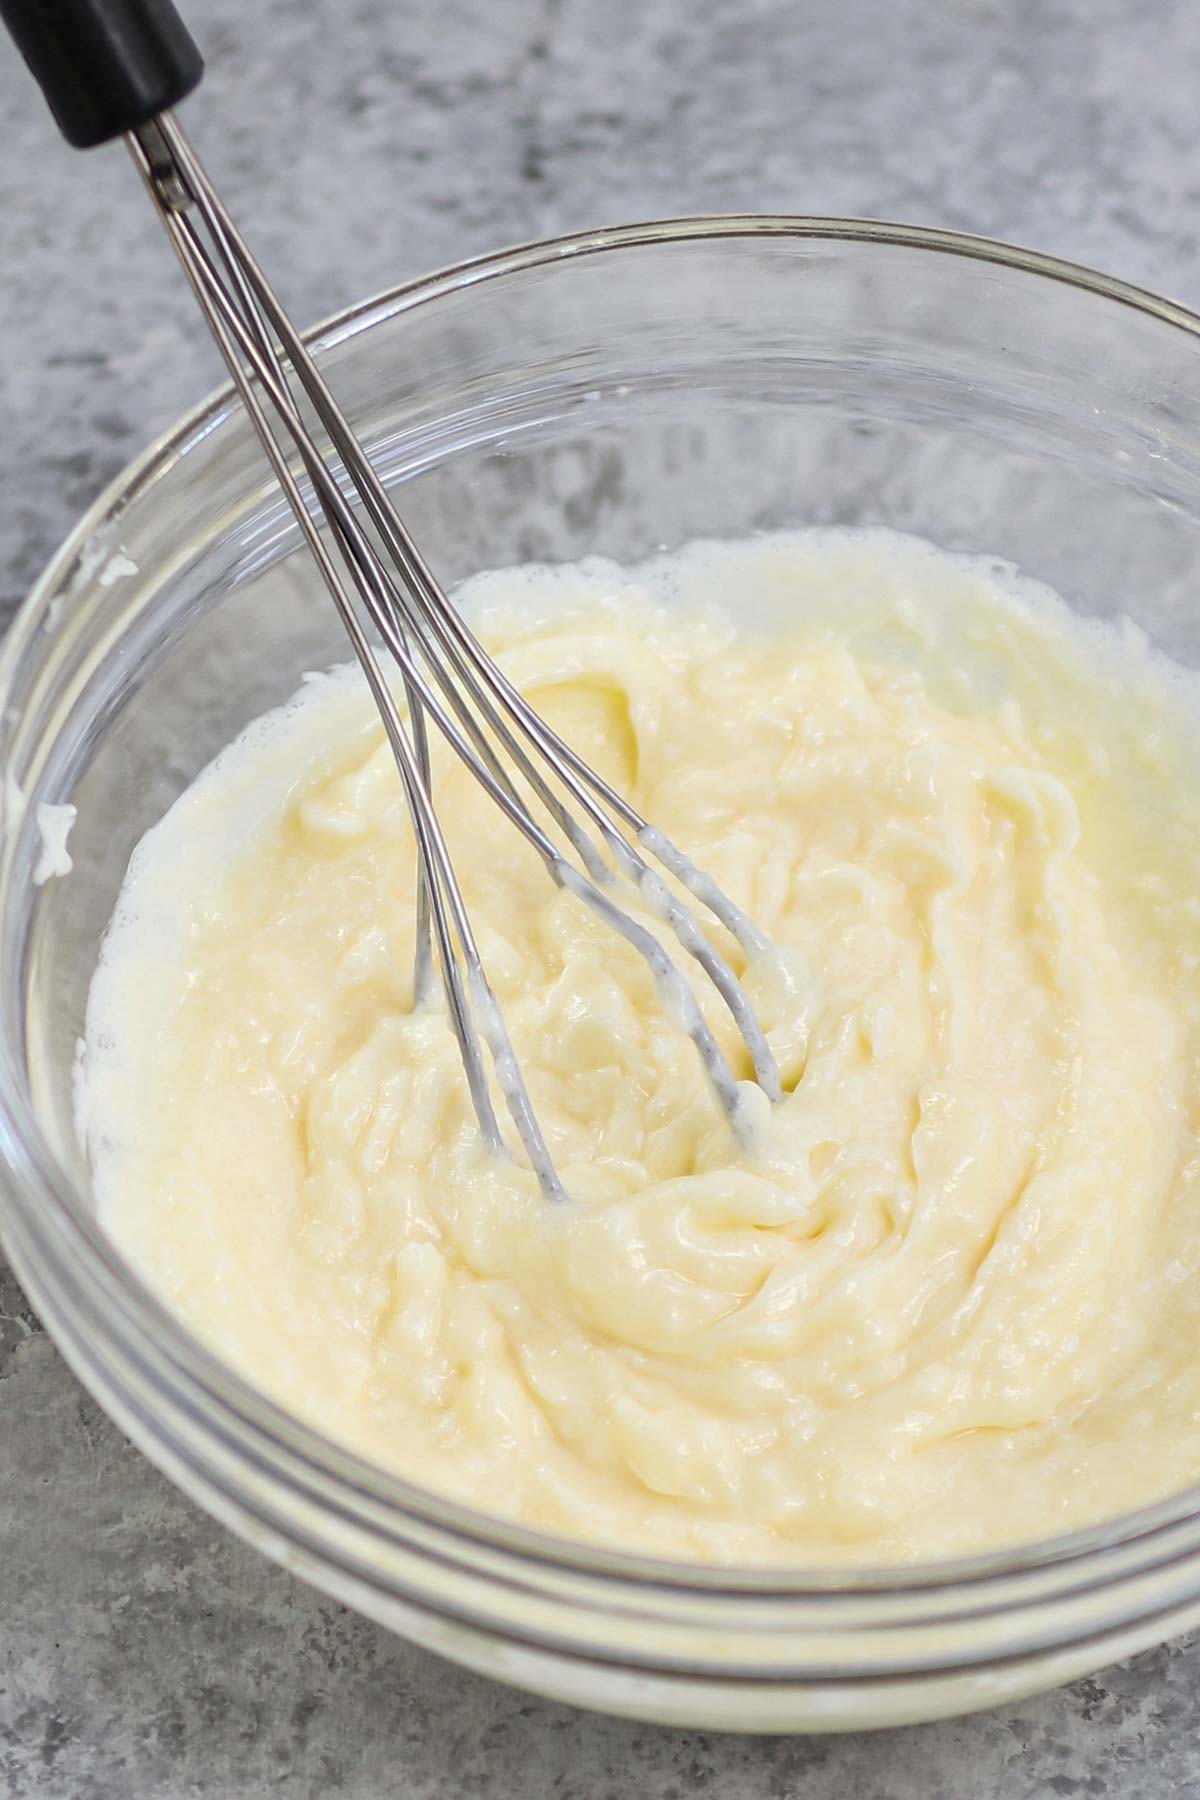 Made with horseradish and mayonnaise, Arby’s Horsey Sauce is spicy and creamy, perfect for sandwiches and burgers, or as a dip for fries. It’s so easy to recreate the immensely popular sauce at home with this simple copycat recipe, and it’s much better than the store-bought packets. 